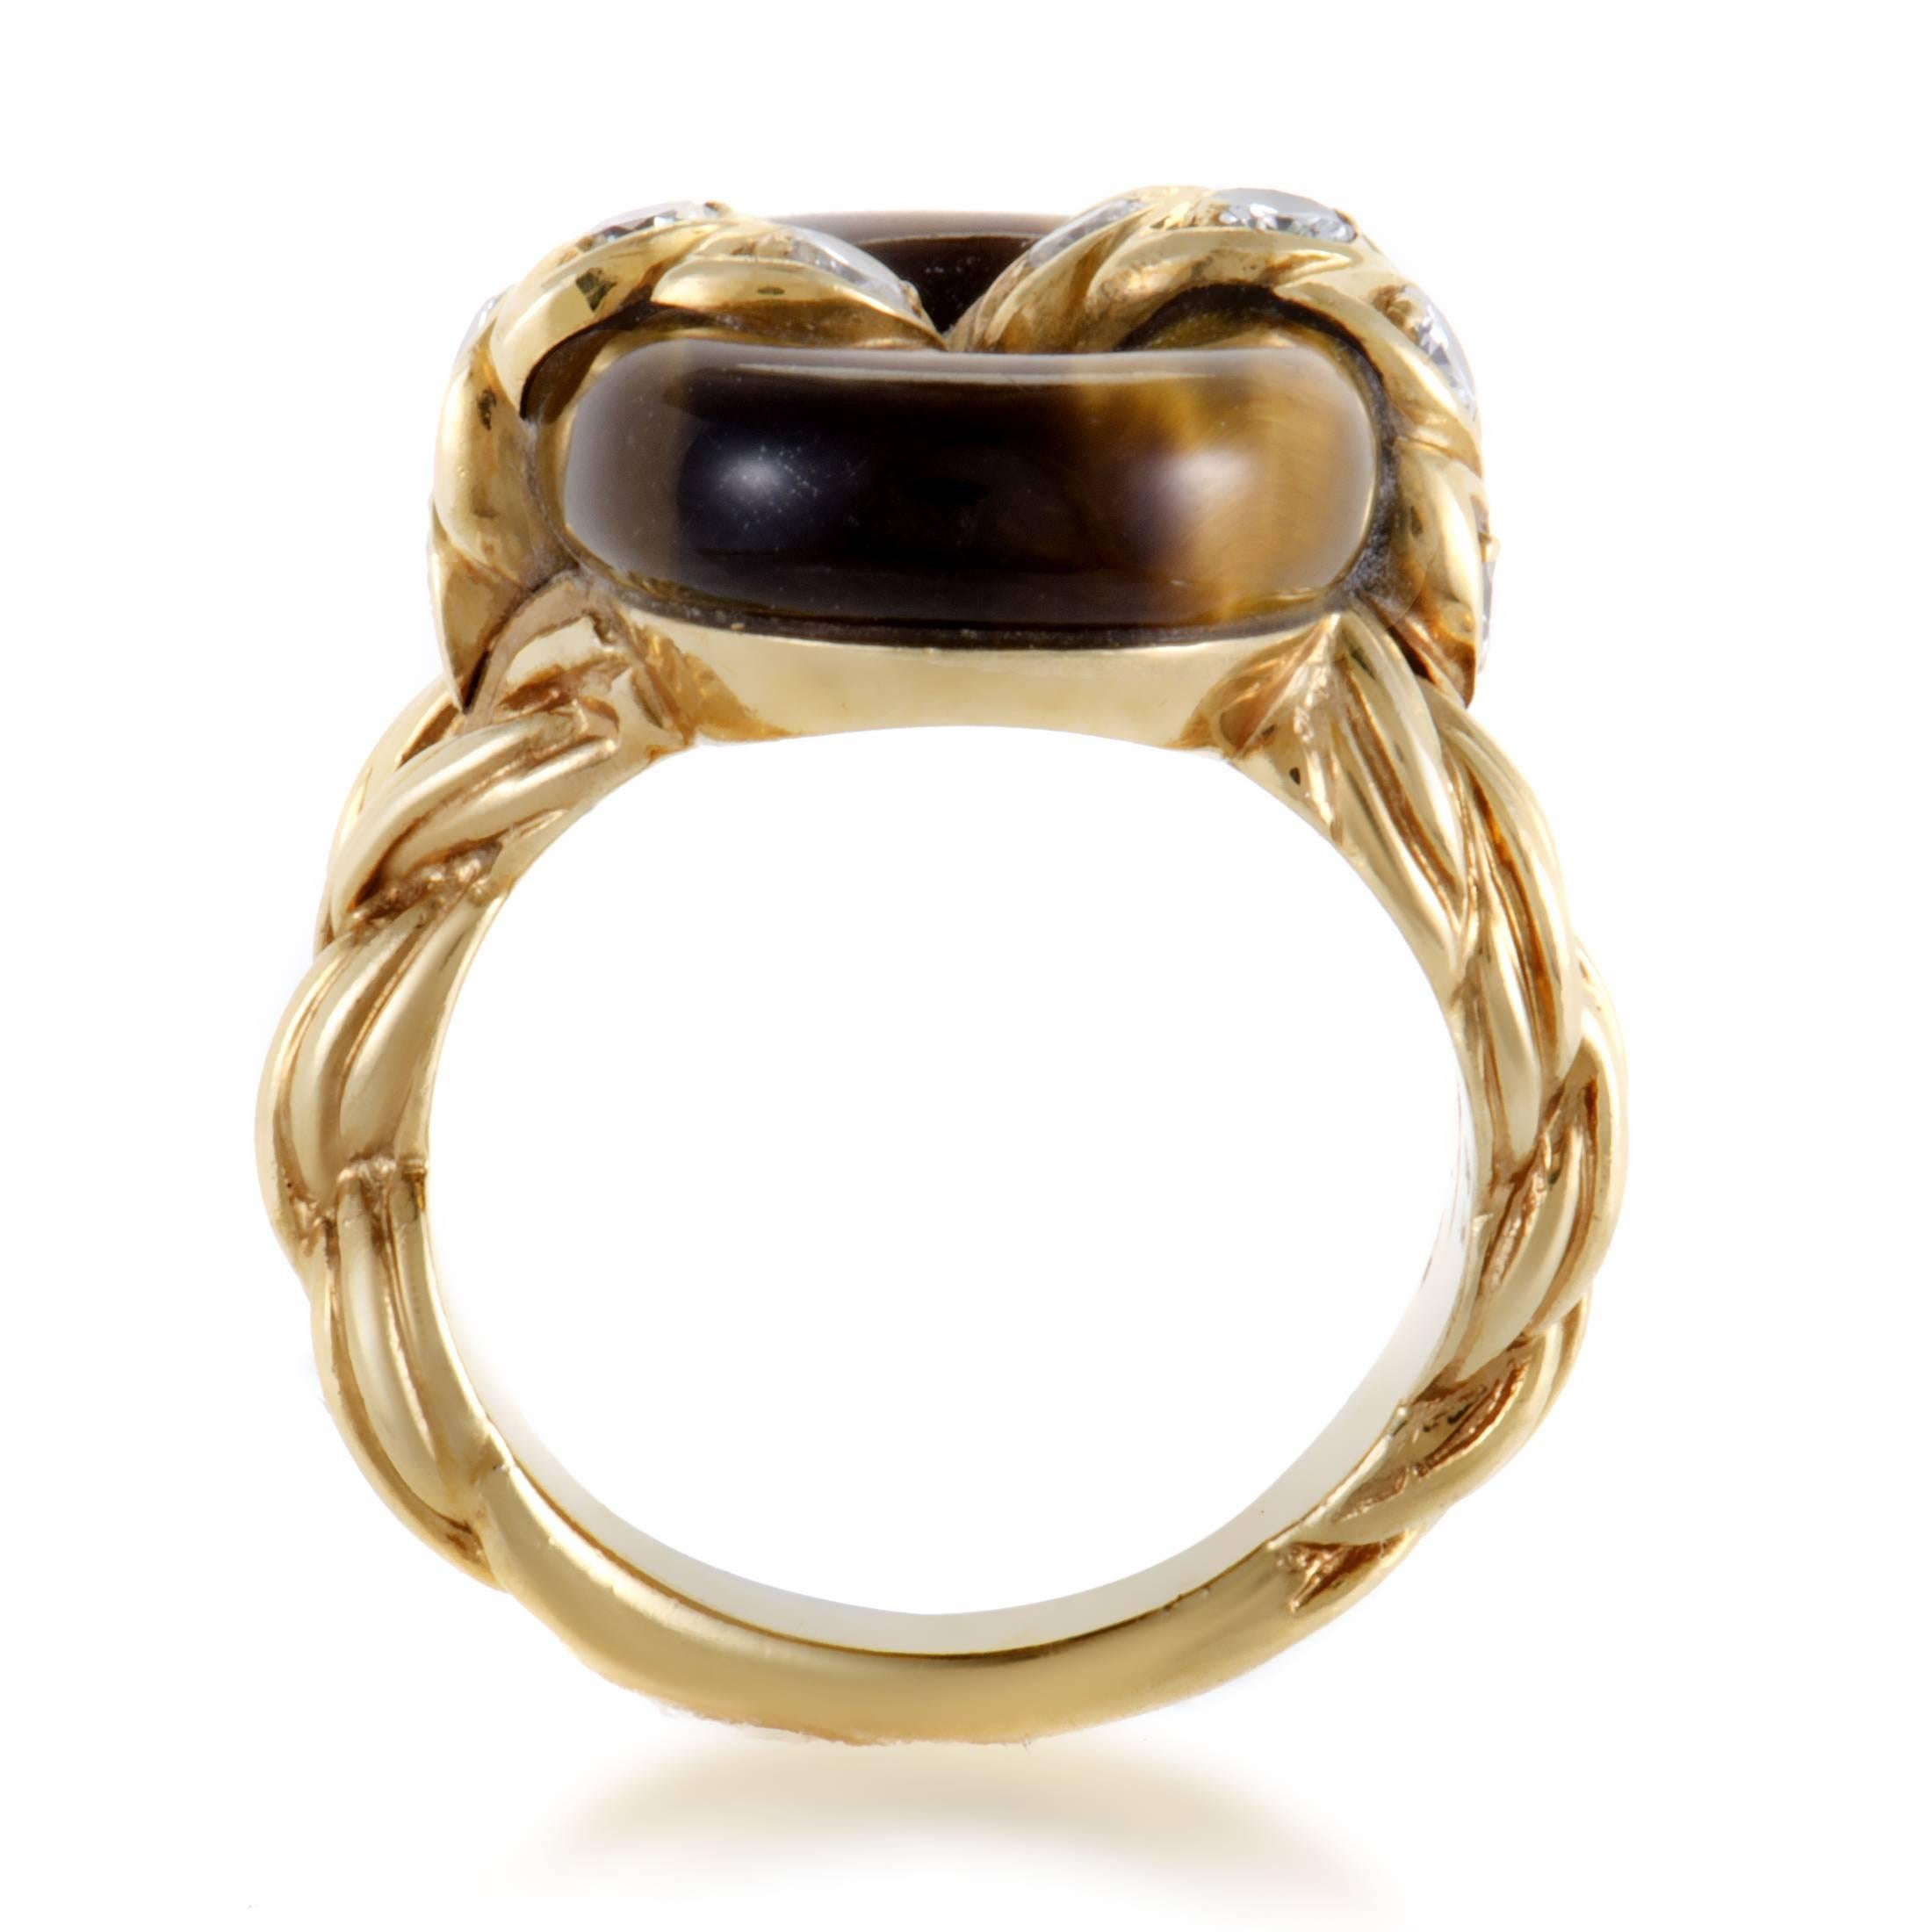 Exquisitely ornamented 18K yellow gold, expertly set diamonds weighing in total 0.48ct and remarkably shaped tiger eye stone create a magnificent appearance in this sublime vintage ring from Van Cleef & Arpels.
Included Items: Manufacturer's